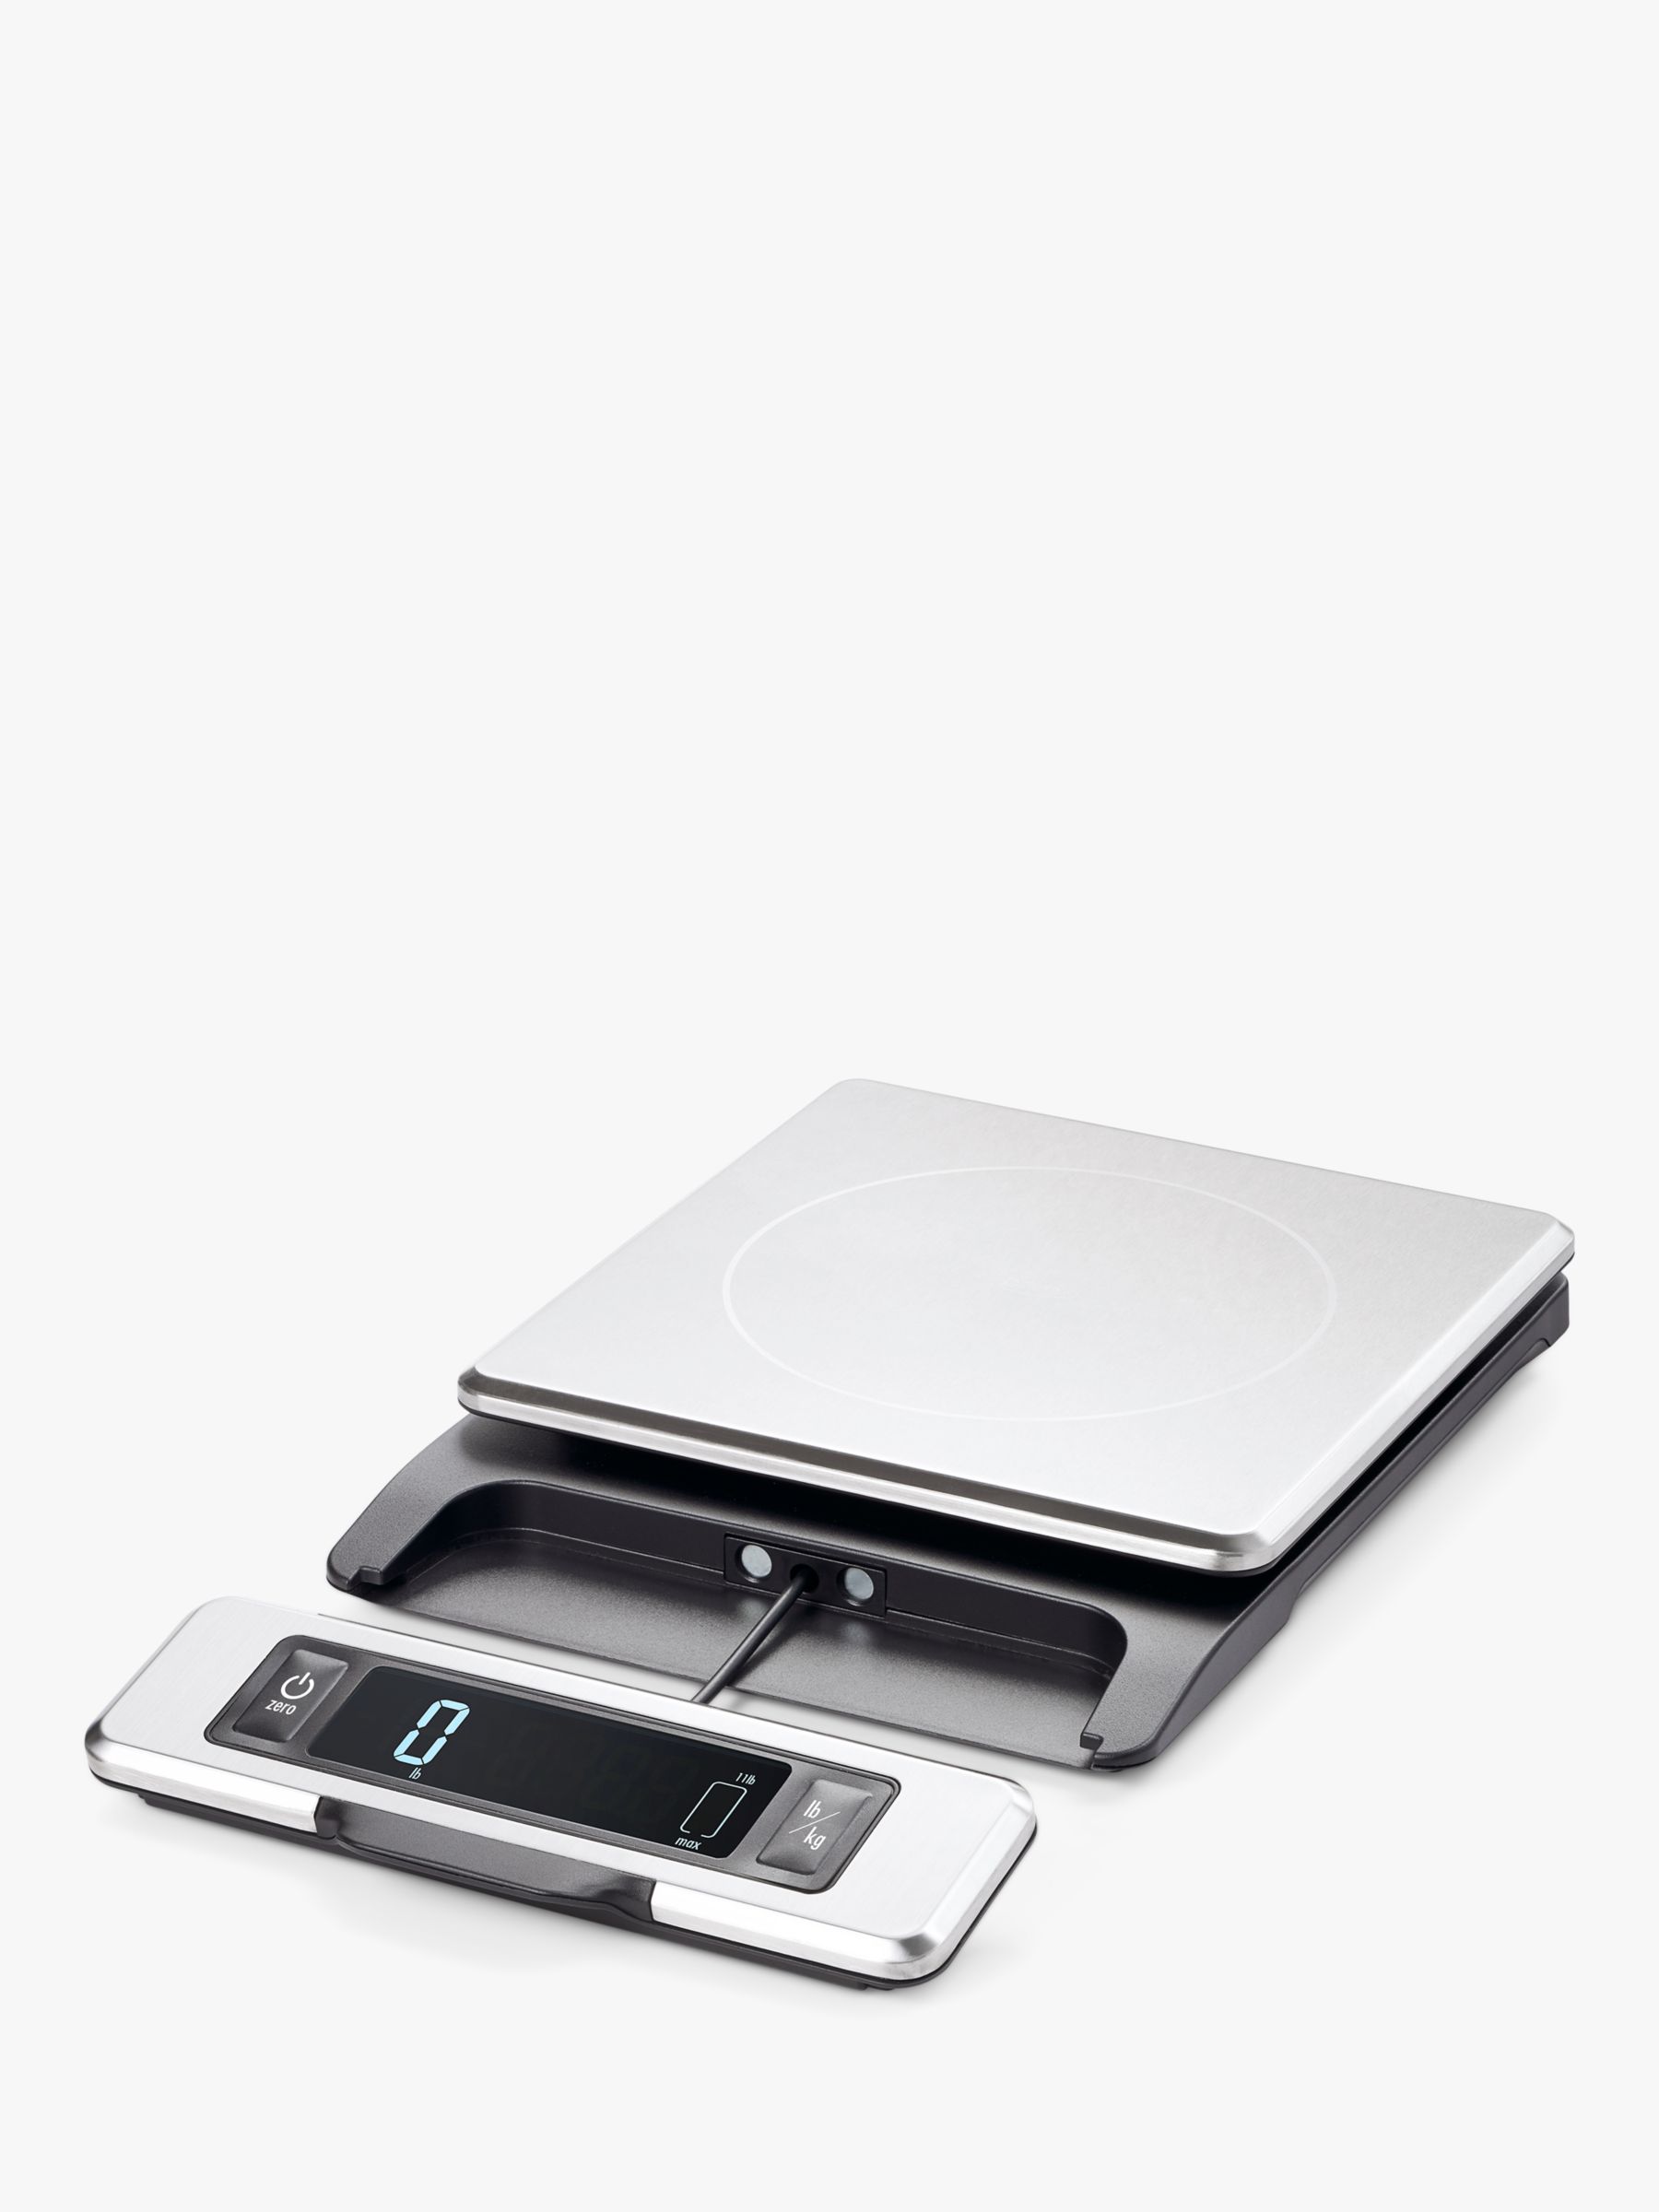 The Veracious Vegan: OXO Good Grips 5 lb. Food Scale Giveaway!